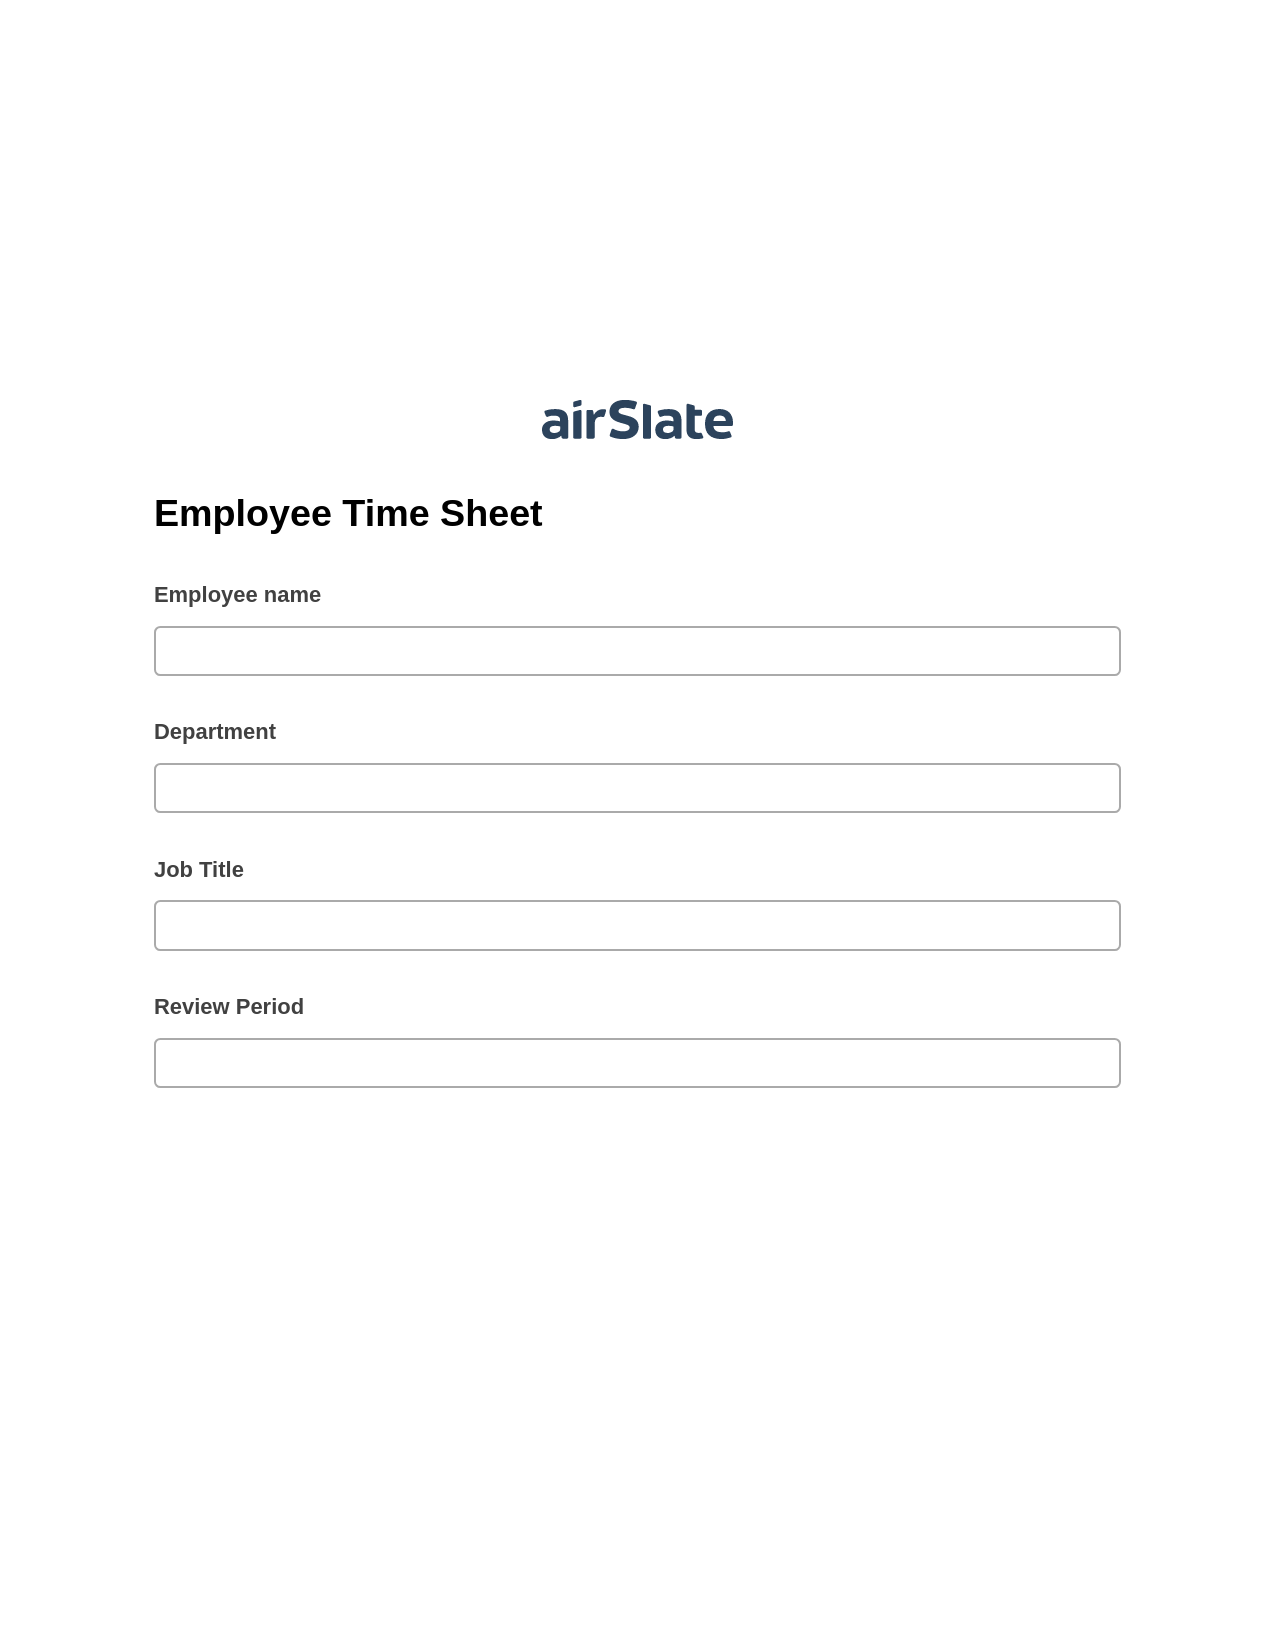 Multirole Employee Time Sheet Pre-fill from MS Dynamics 365 Records, Create slate from another Flow Bot, Export to Smartsheet